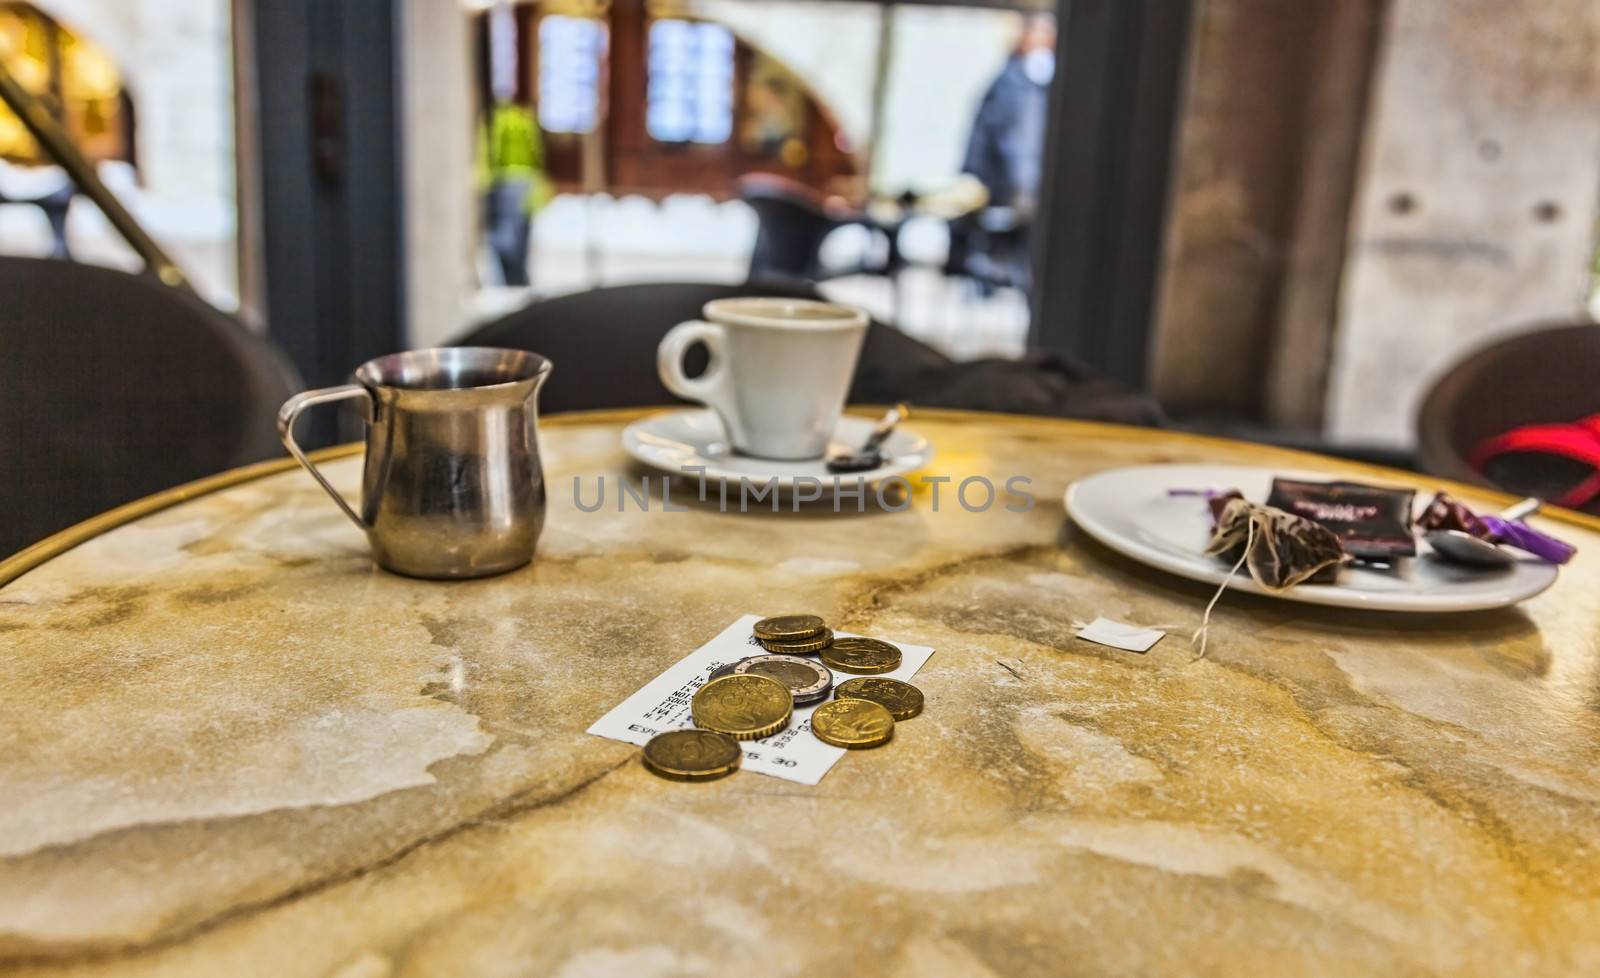 Few coins and the bill on a coffee table after the clients have left.